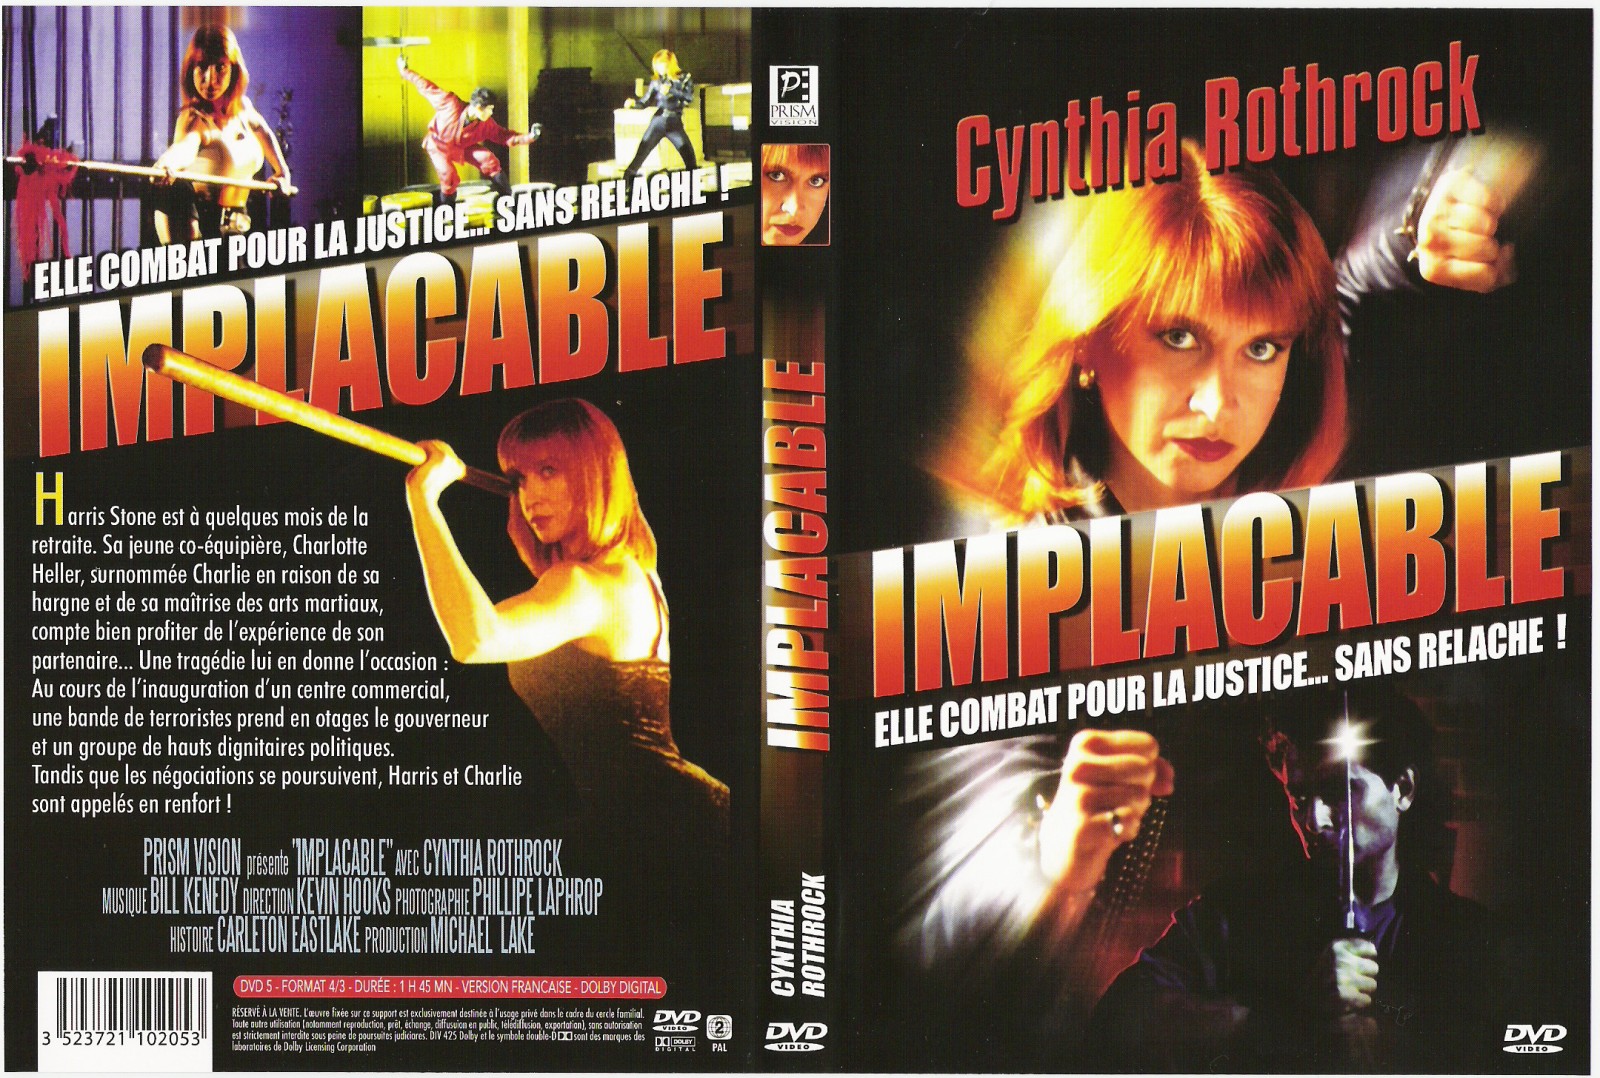 Jaquette DVD Implacable